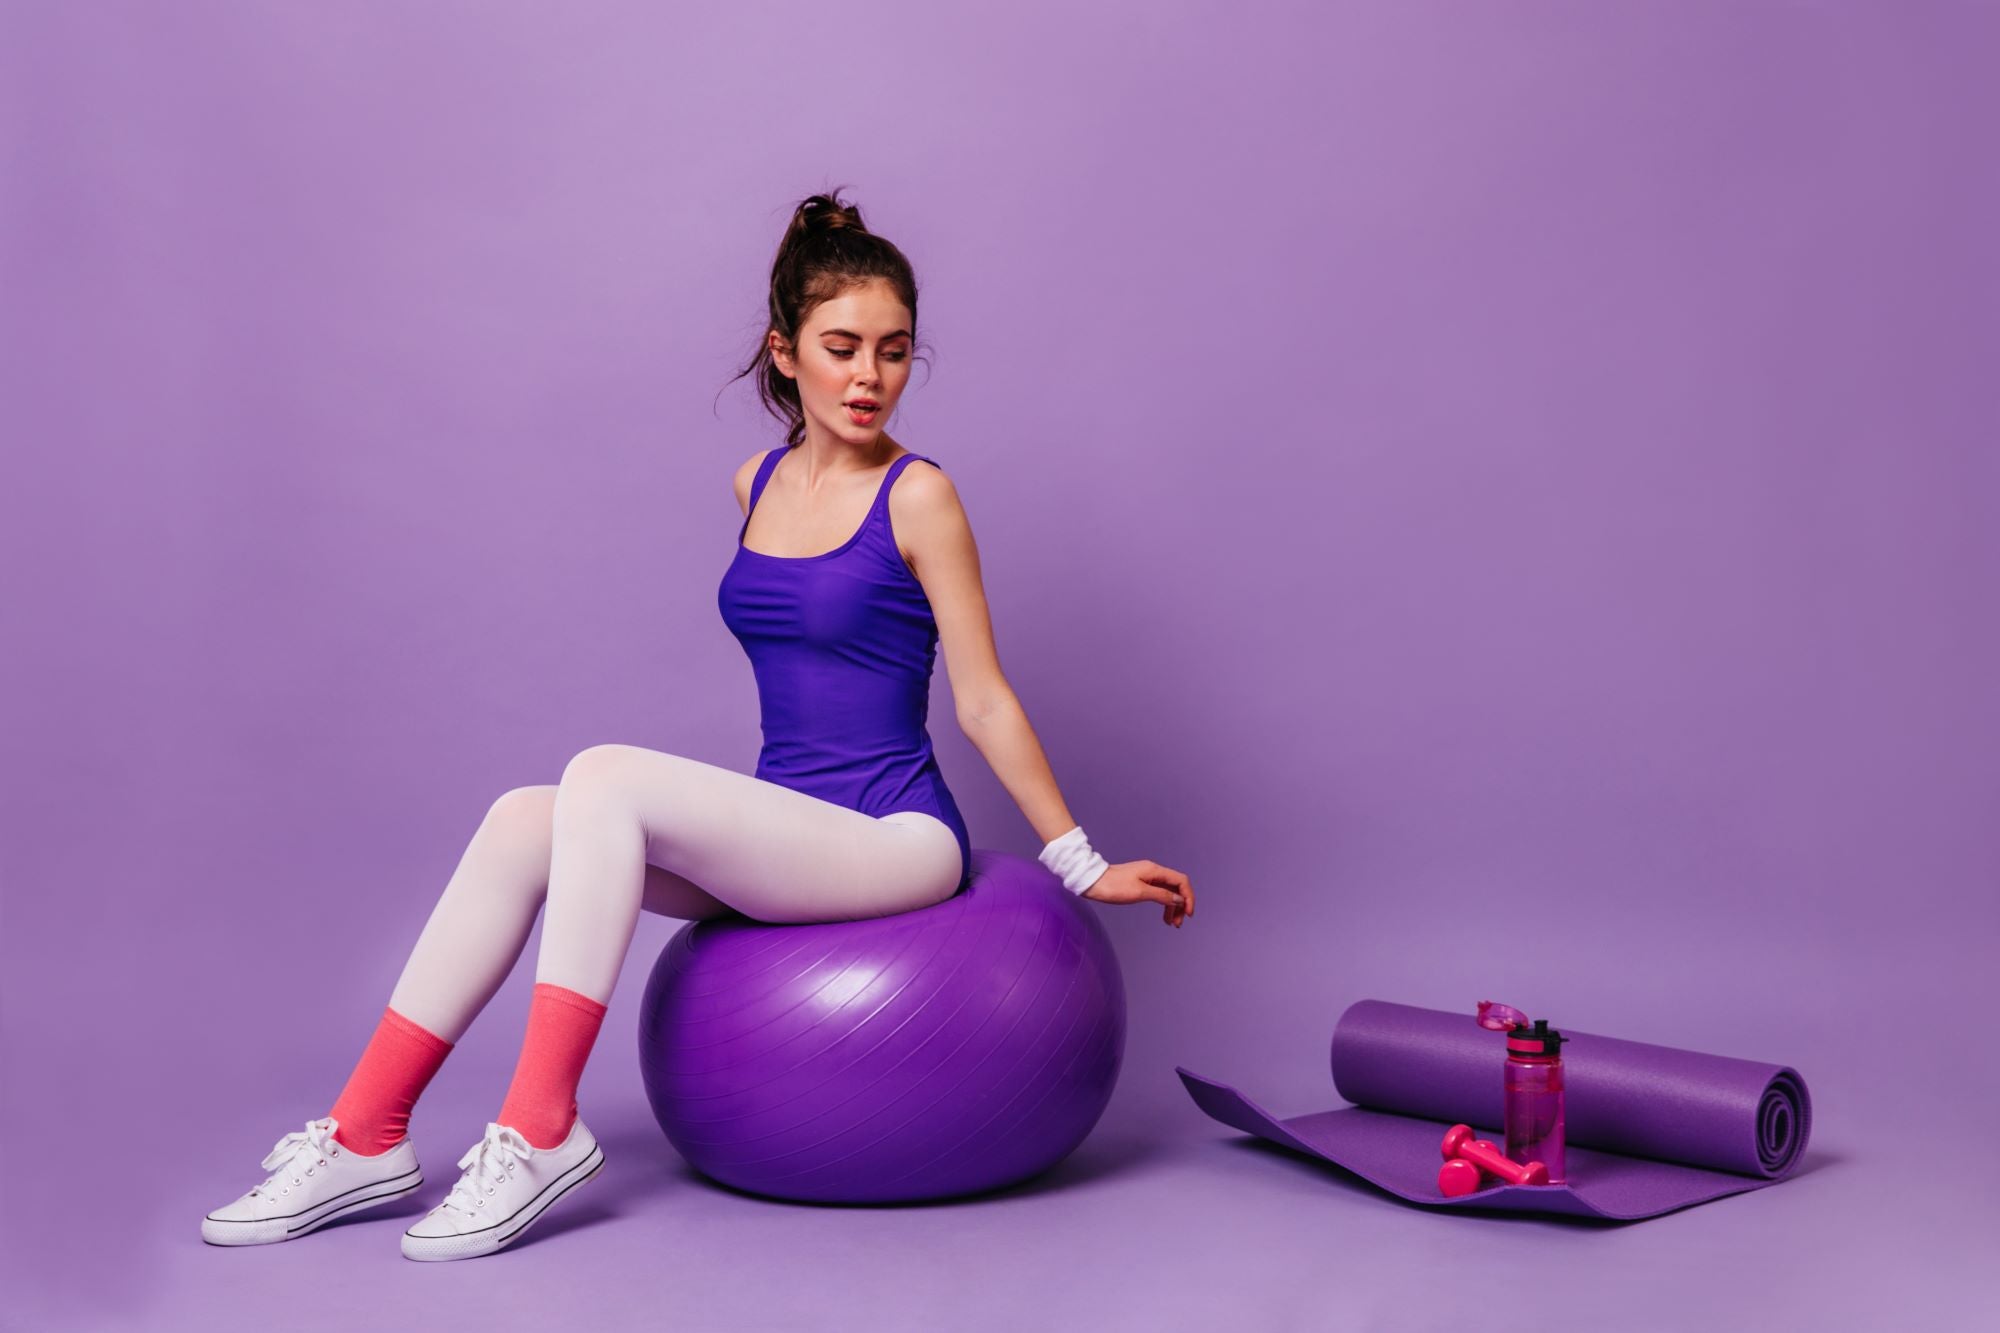 woman-leggings-yoga-sits-ball_Resize - Best Fitness Look